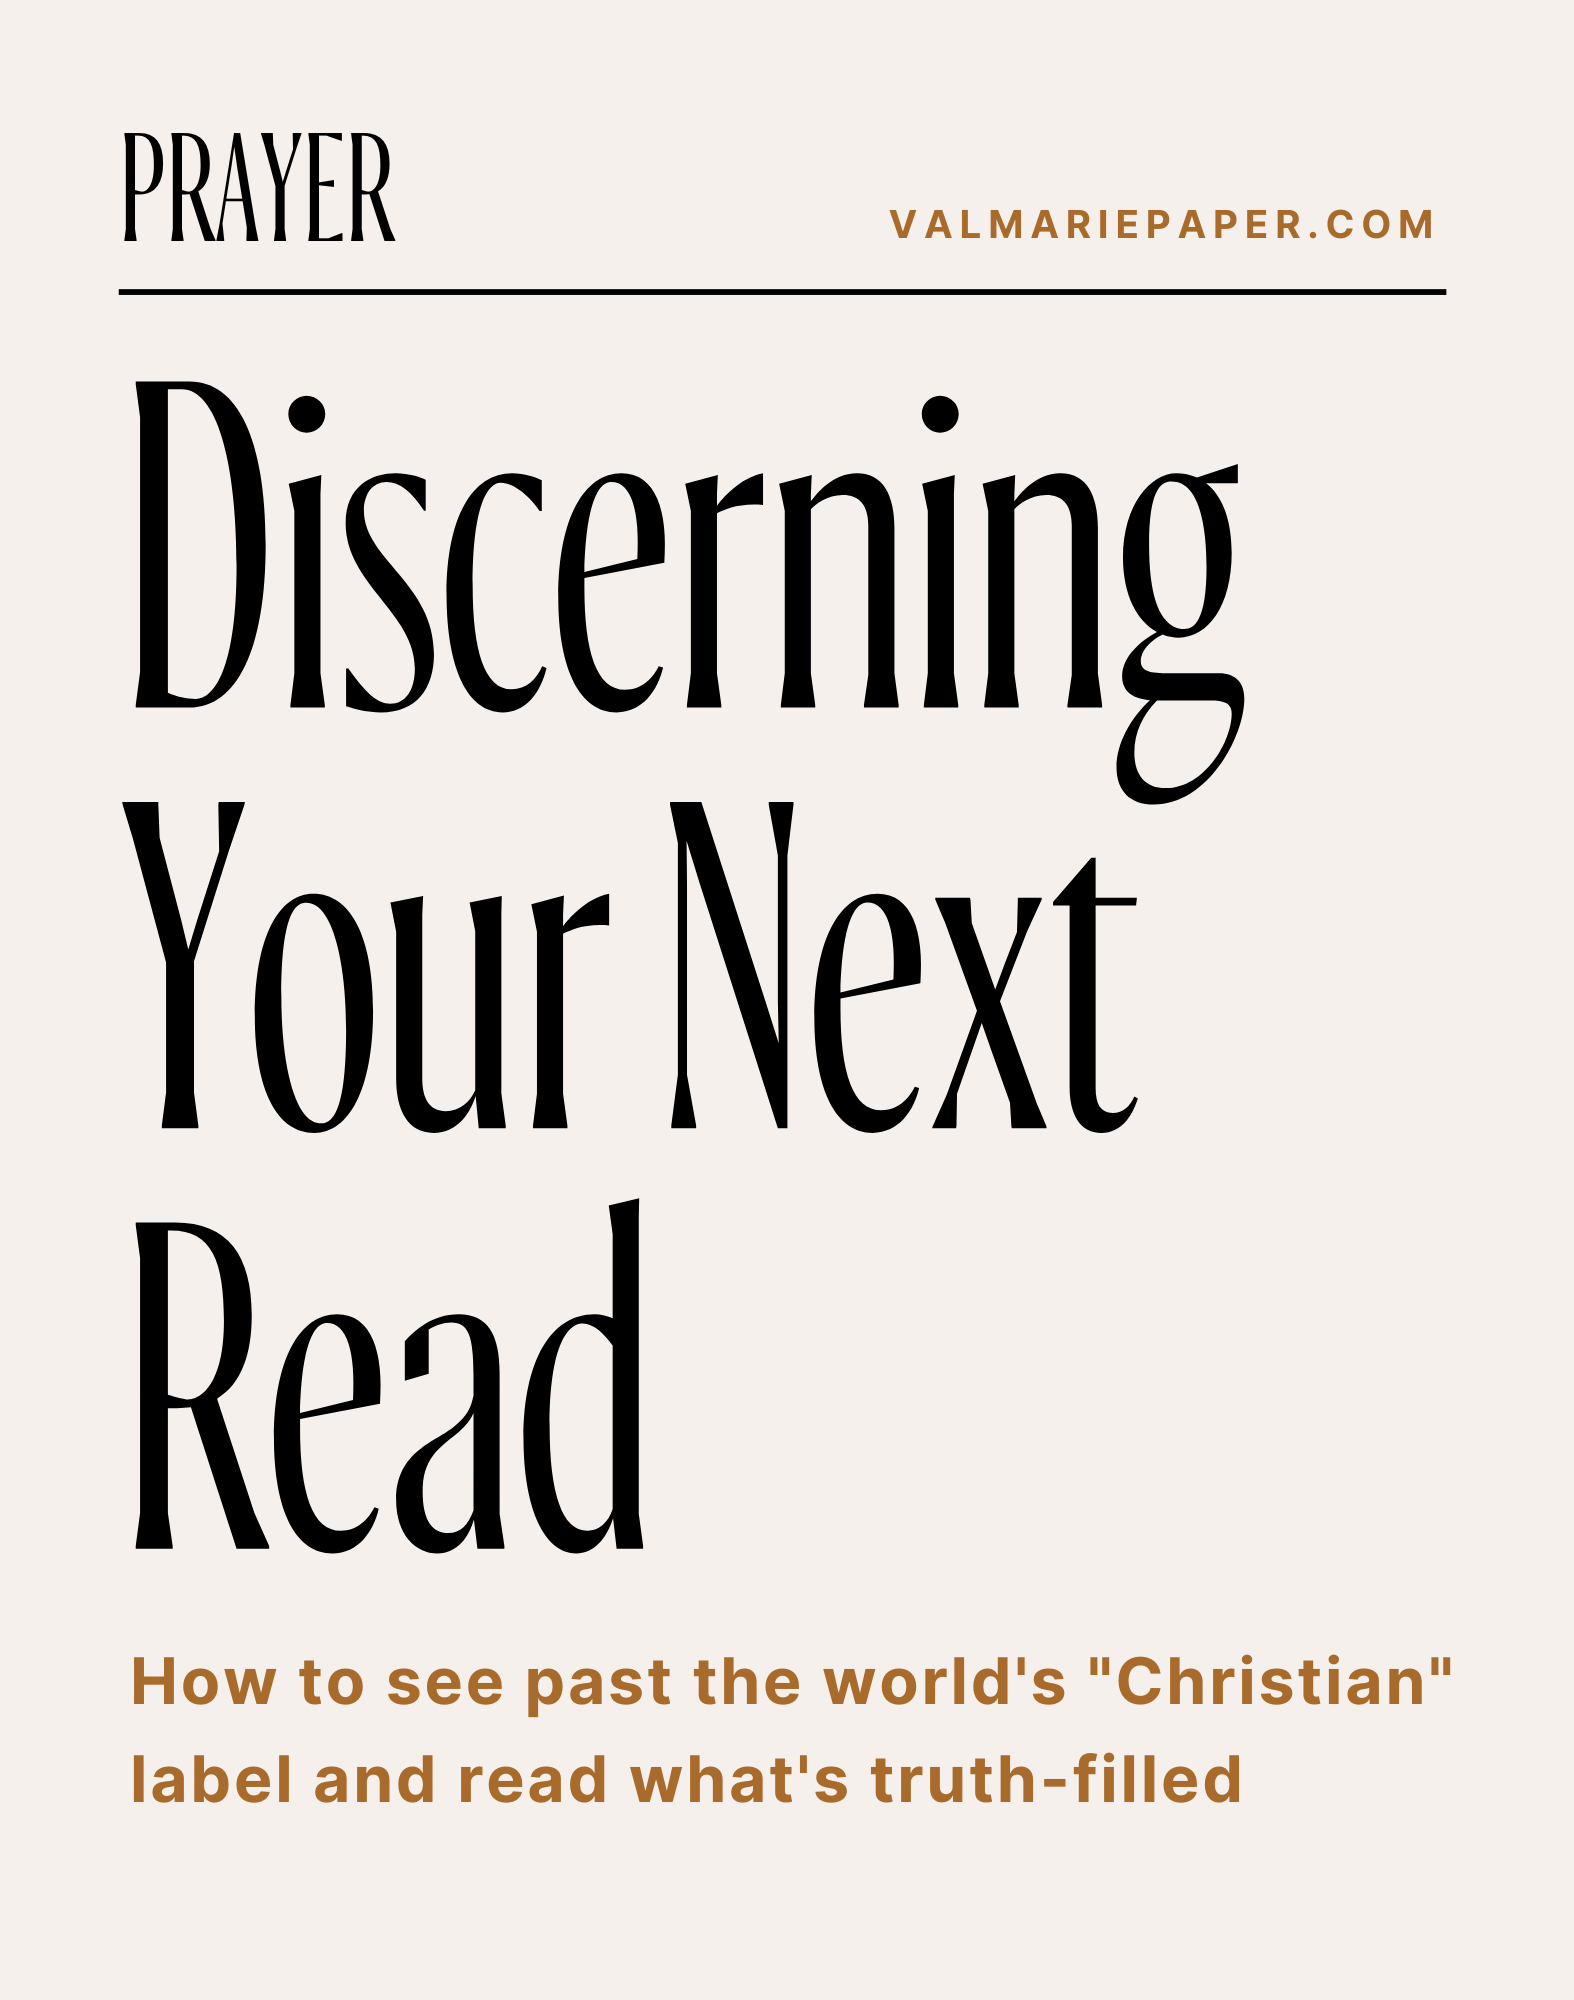 How to discern which books to read by Valerie Woerner, prayer journal, women's ministry, prayer, refresh, meditation, how to make a prayer journal, praying for your kids, husband, prayer warrior, war room, Bible study, tools, prayer notebook, how to pray, community, small group, bible study, books, reading, christian books